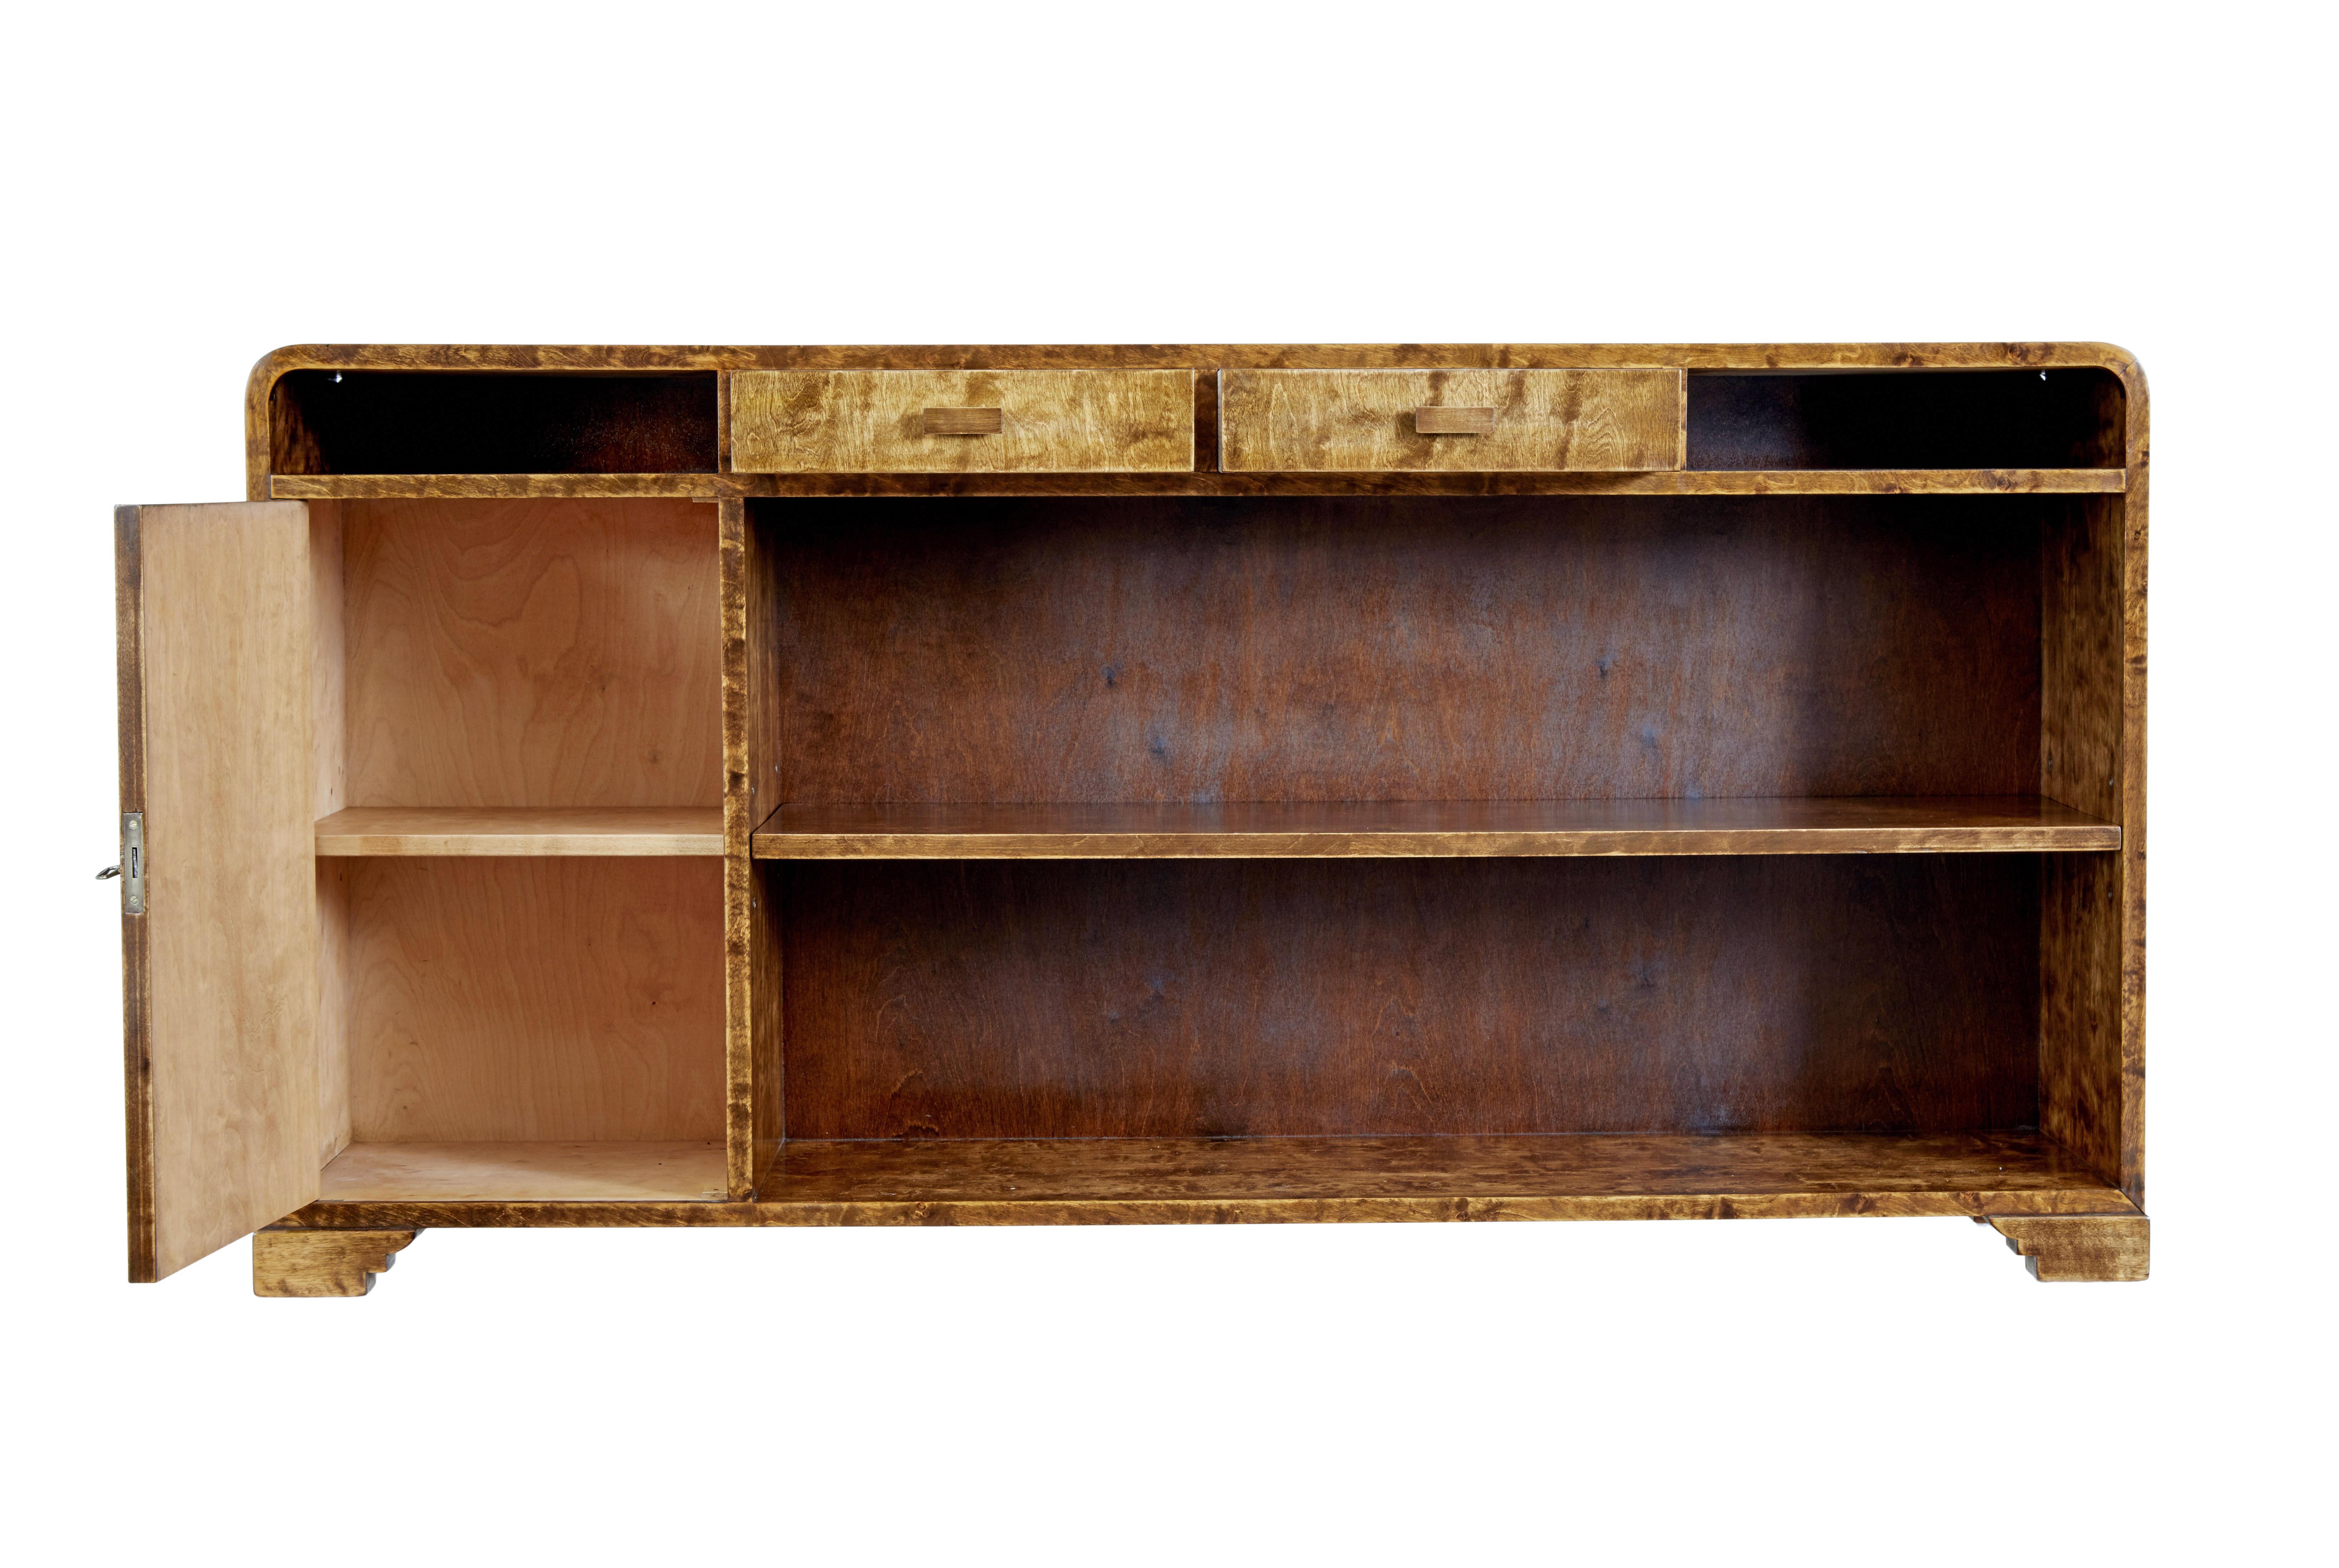 Mid 20th century Scandinavian birch bookcase by SMF Bodafors circa 1950.

Stunning burr birch low bookcase with rich golden colour. Shaped top with 2 drawers below the top surface and 2 open apertures for storage.

Single door cupboard to the